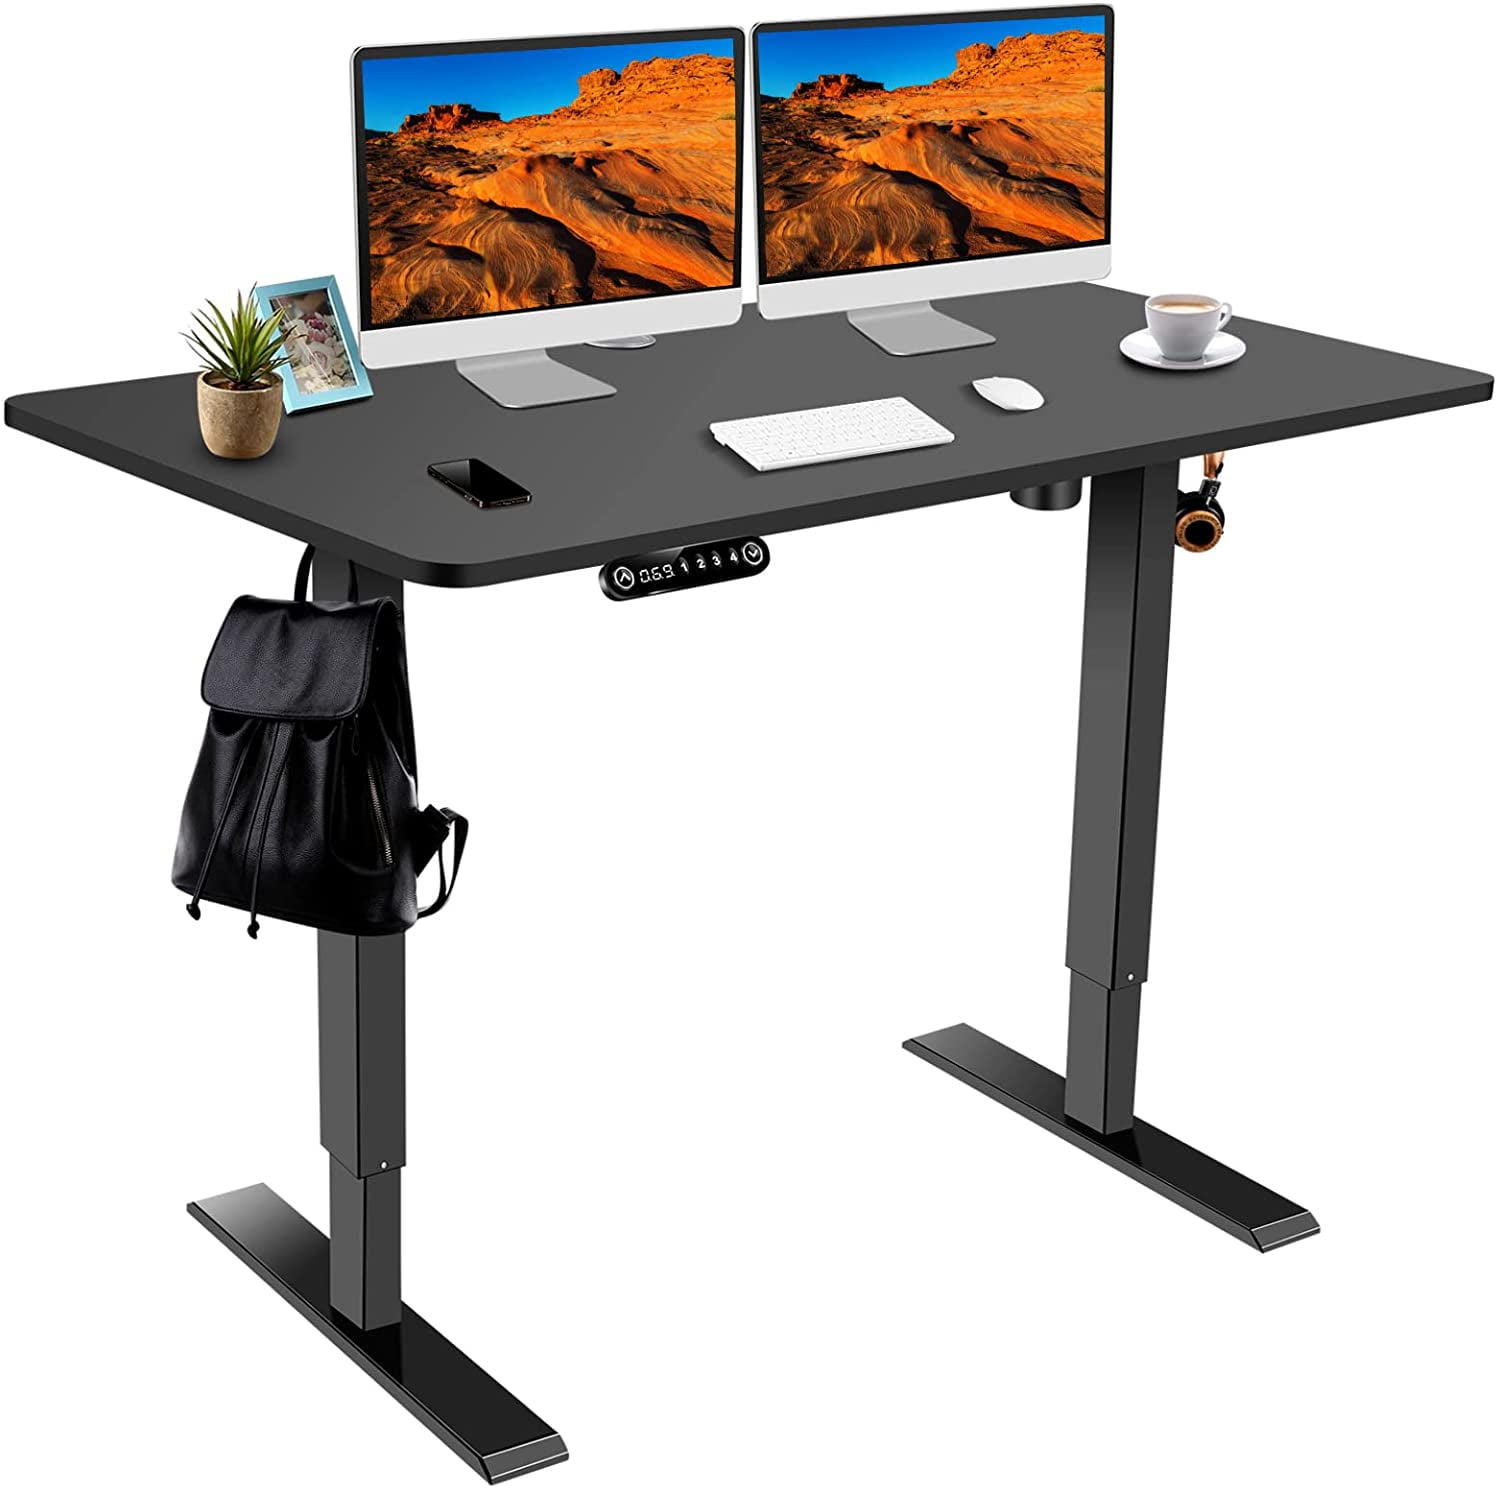 Splice Board Black Frame/Rustic Brown 48 x 24 Inch Electric Sit to Stand Table with Memory Settings HOMHUM Adjustable Standing Desk Large Mouse Pad for Home Office Use 